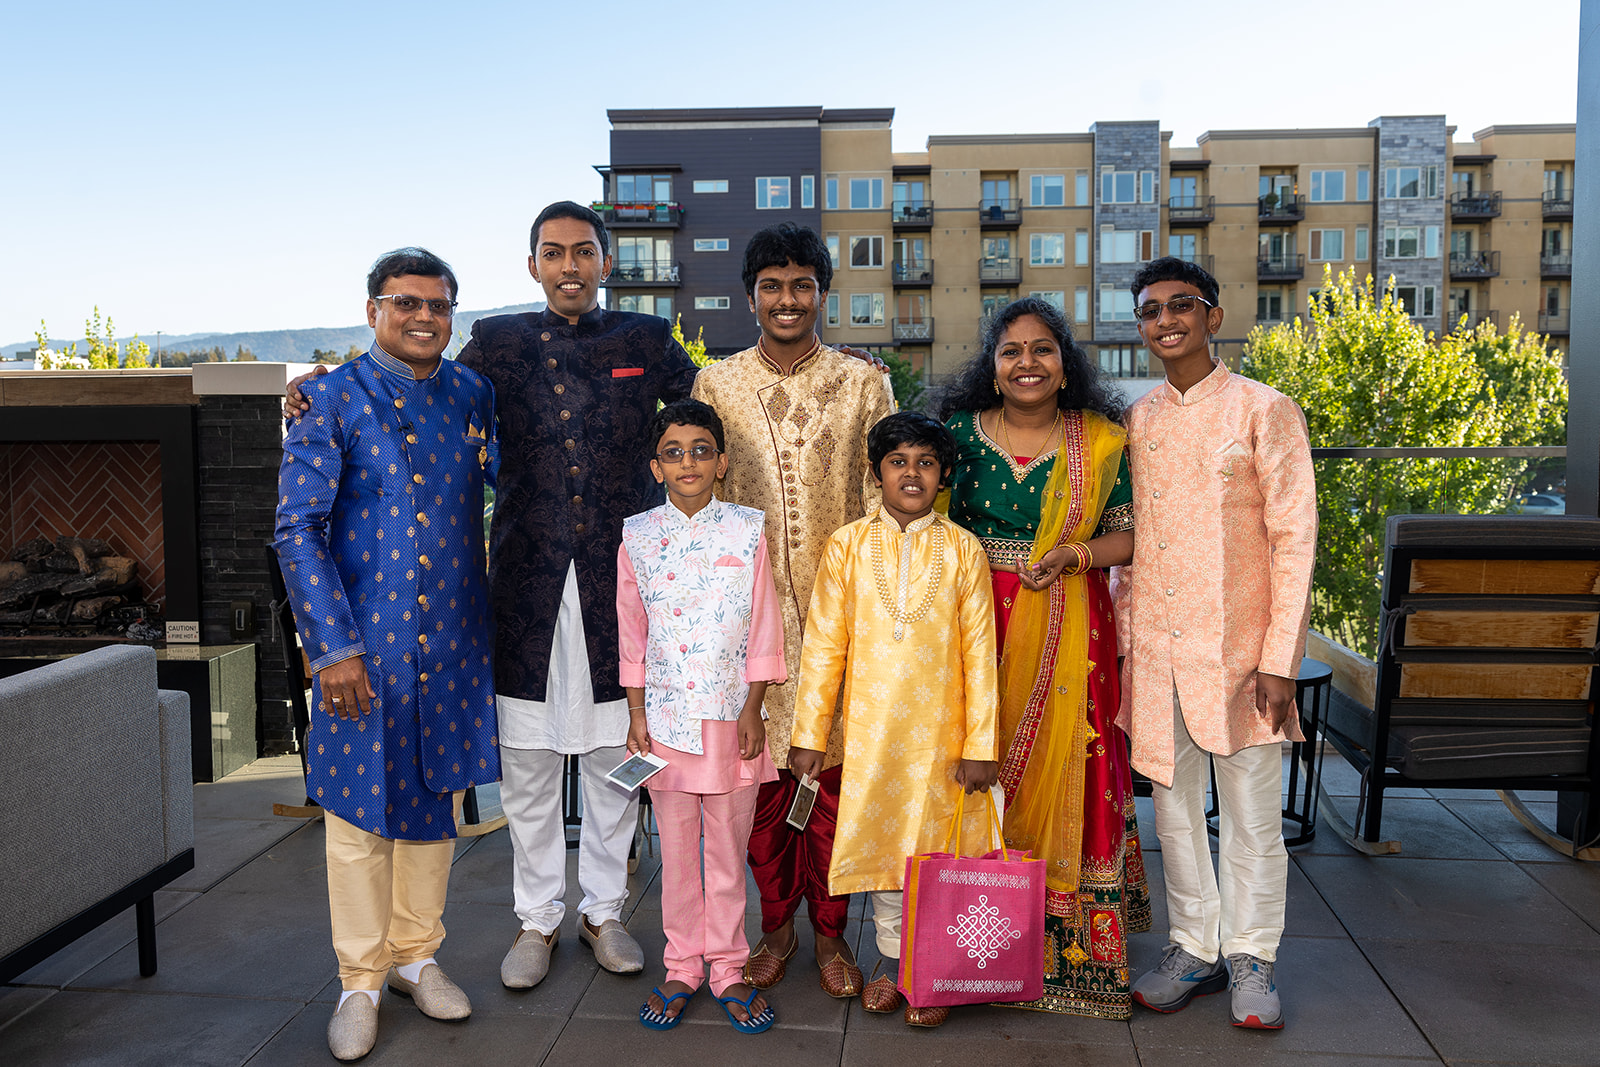 Hyatt Centric, a Bay Area Indian Wedding Venue that allows a skyline view of the city for group and family photos.